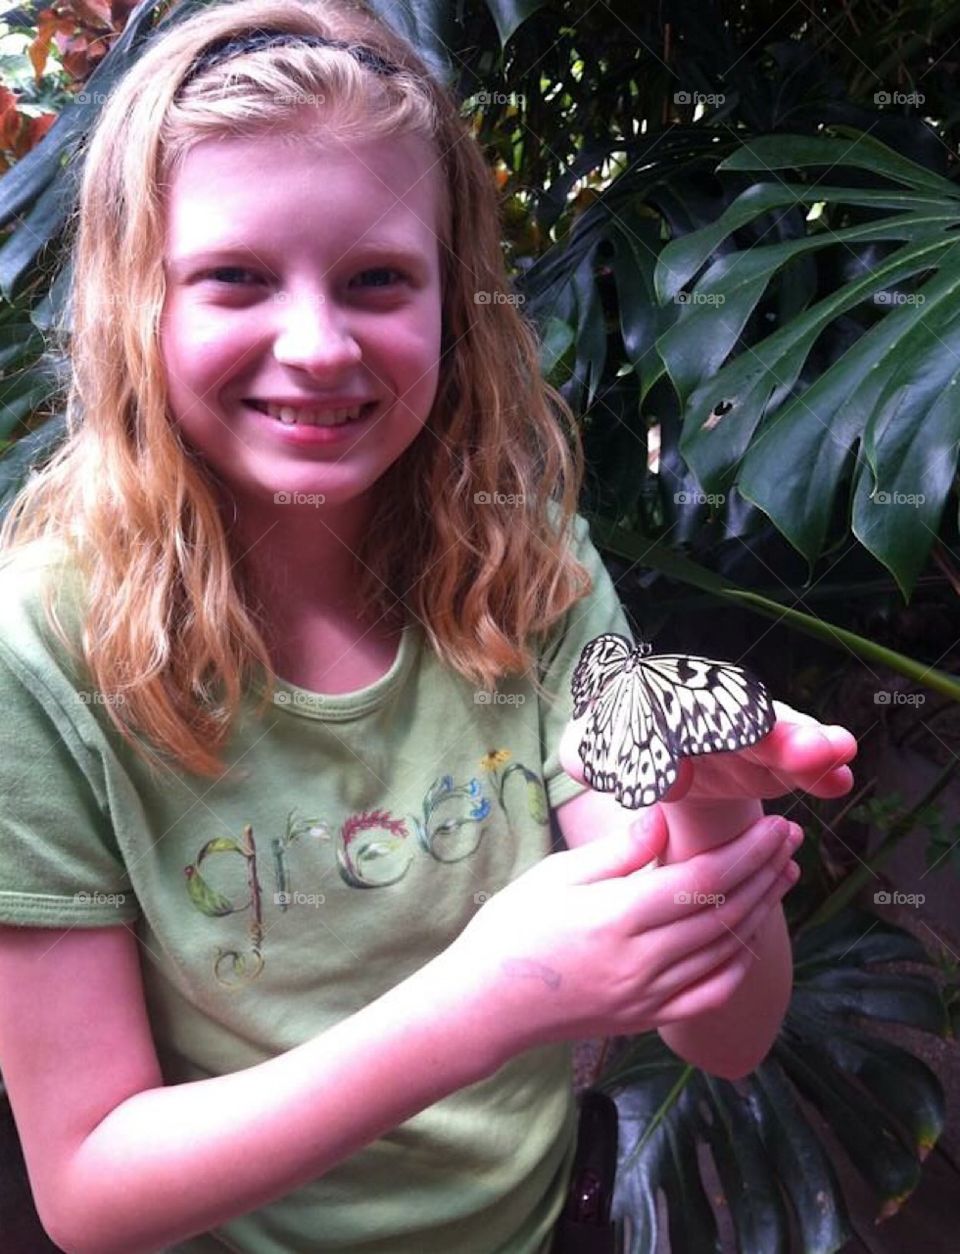 Butterfly 🦋 Conservation in Butchart Gardens, Victoria Island, BC Canada 🇨🇦 She loves them.